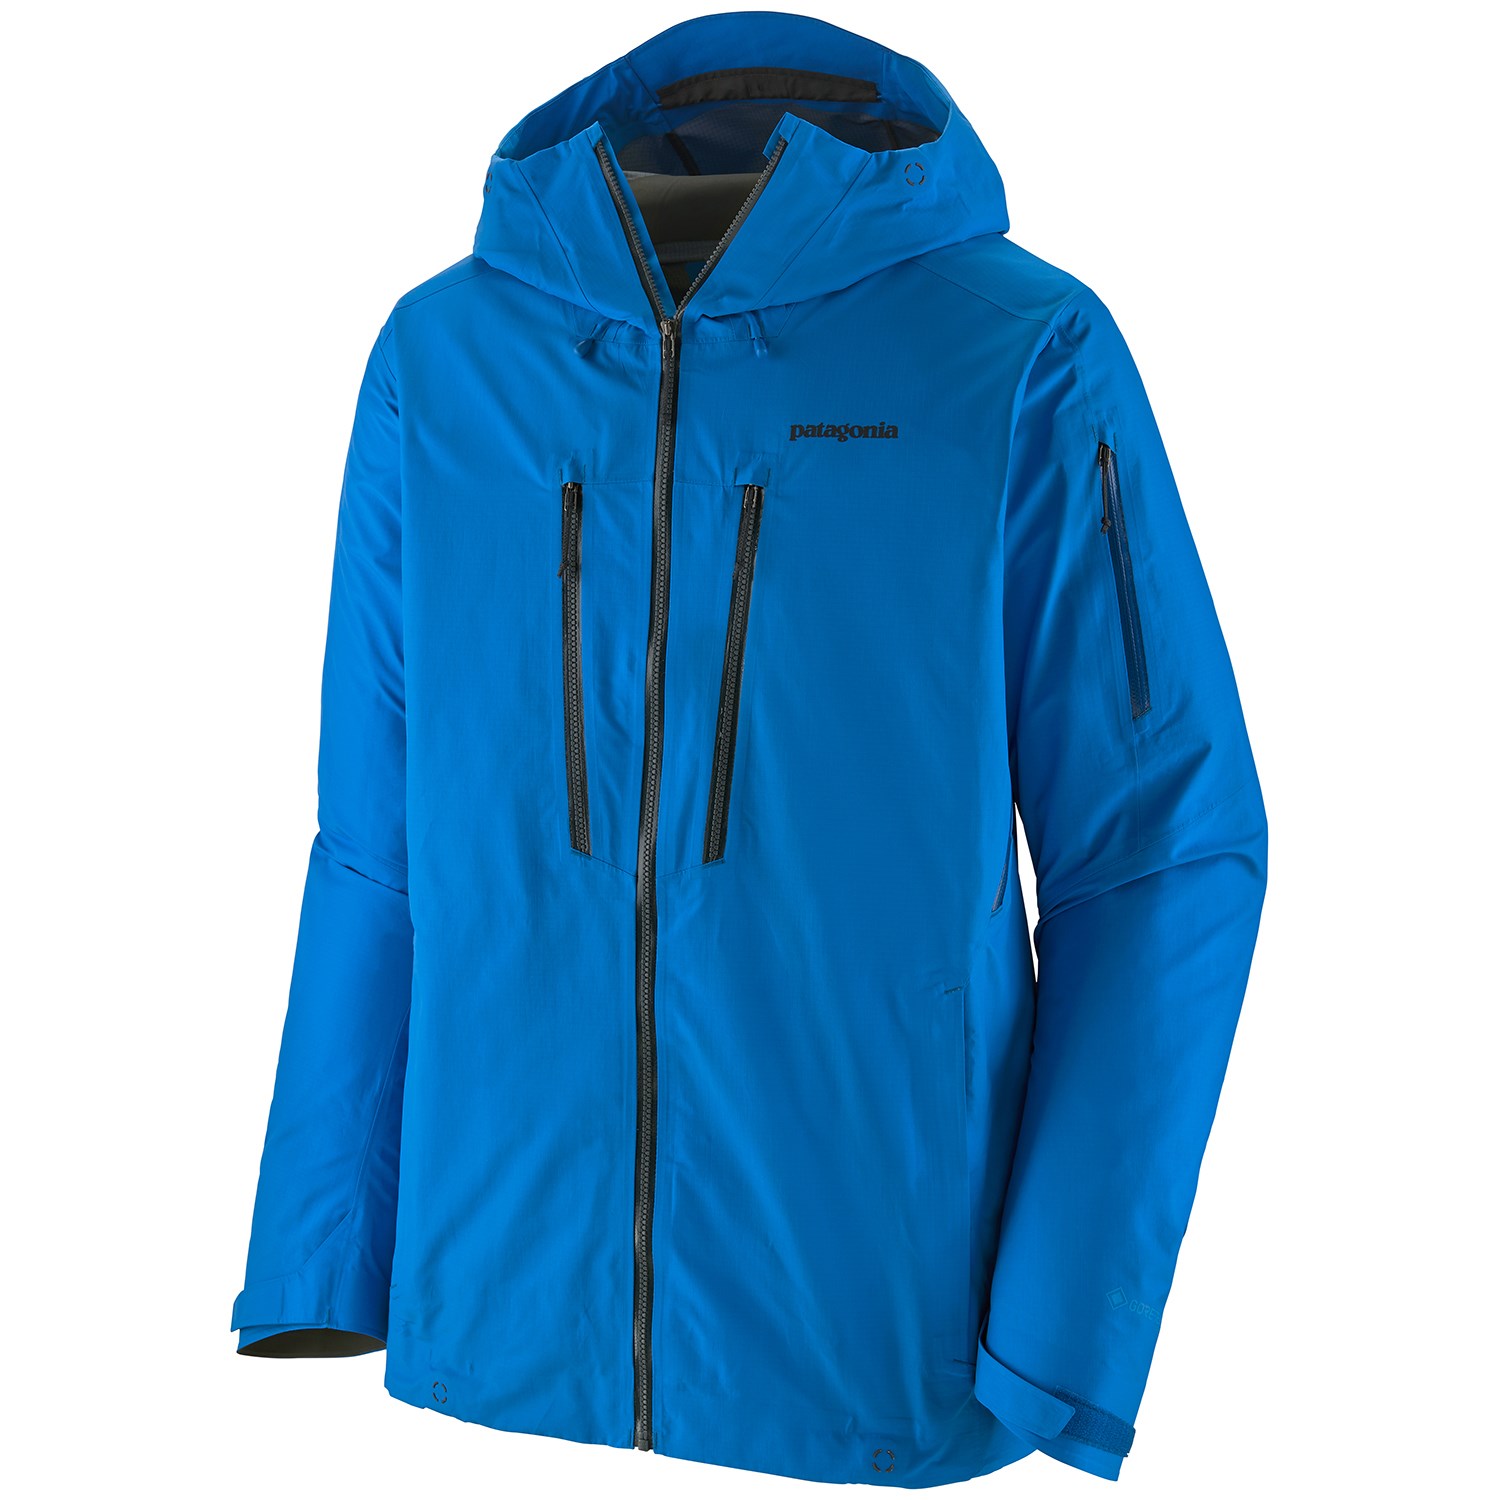 Patagonia PowSlayer Jacket Reviews - Trailspace